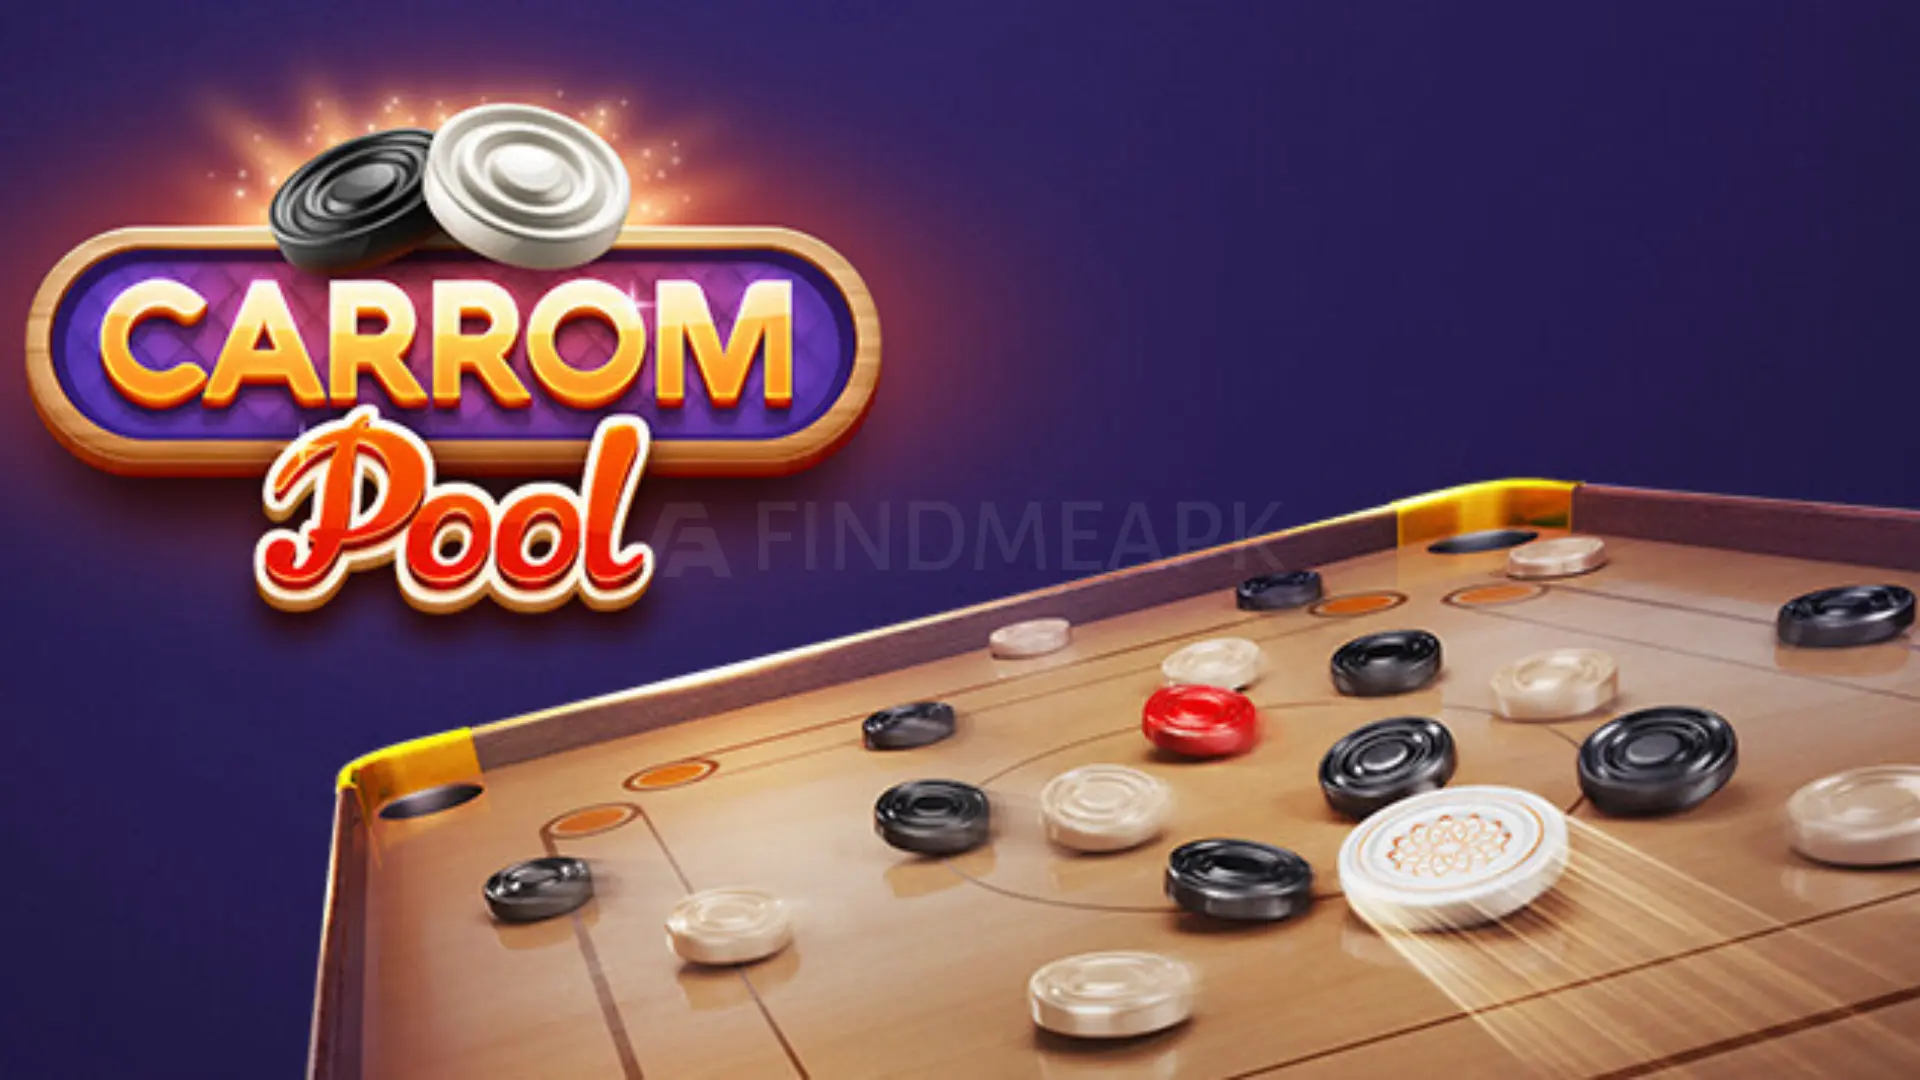 Carrom Pool feature image